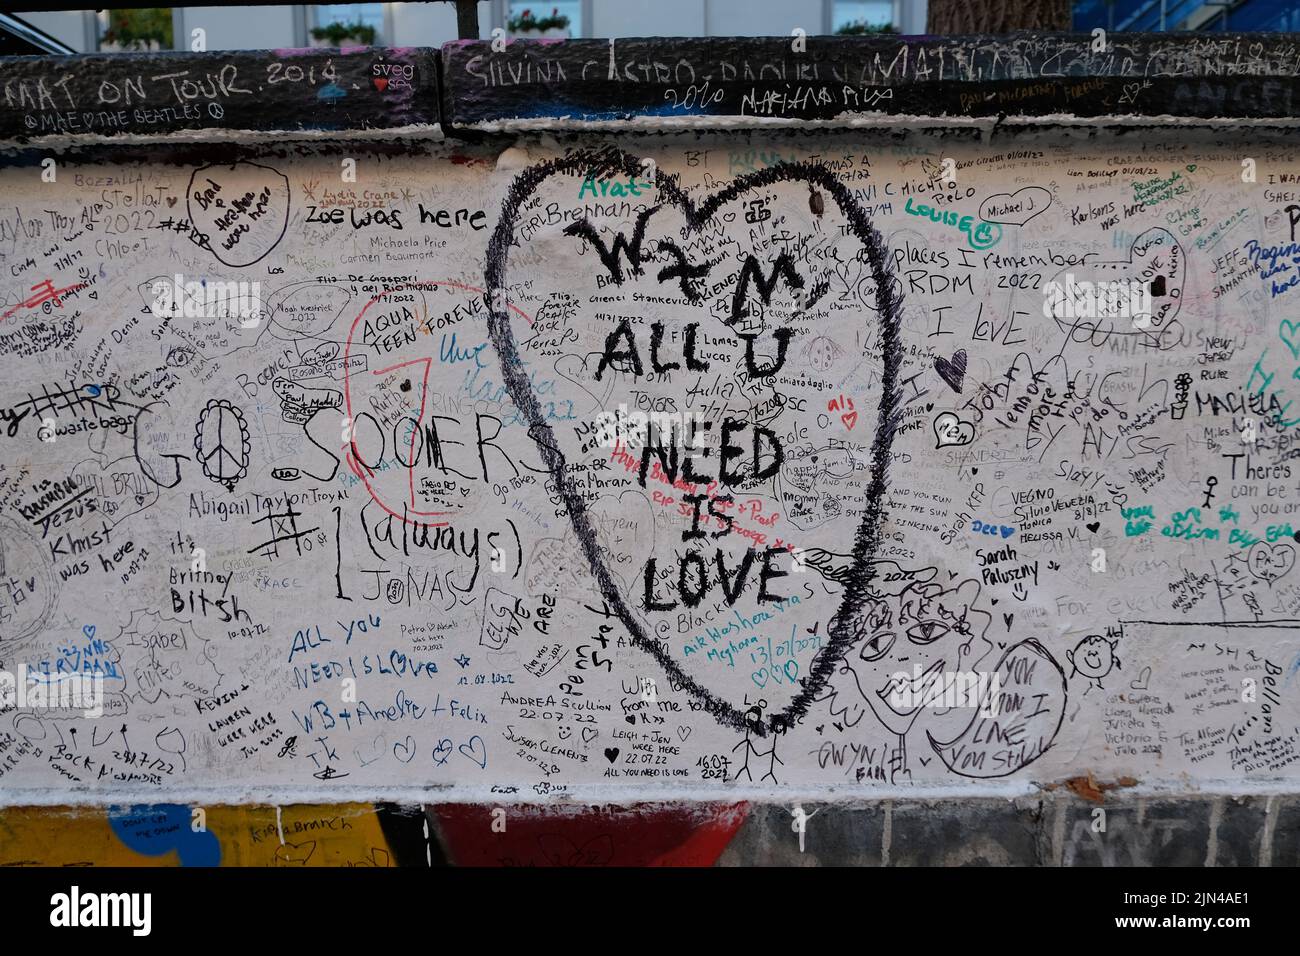 London, UK, 8th Aug, 2022. Messages written on the wall outside Abbey Road studios by fans.  Fifty three years ago to the day on the 8th August 1969, photographer Iain Macmillan took shots of the group walking across the zebra crossing that is close to the recording studio creating the iconic album cover image for 'Abbey Road'. Credit: Eleventh Hour Photography/Alamy Live News Stock Photo